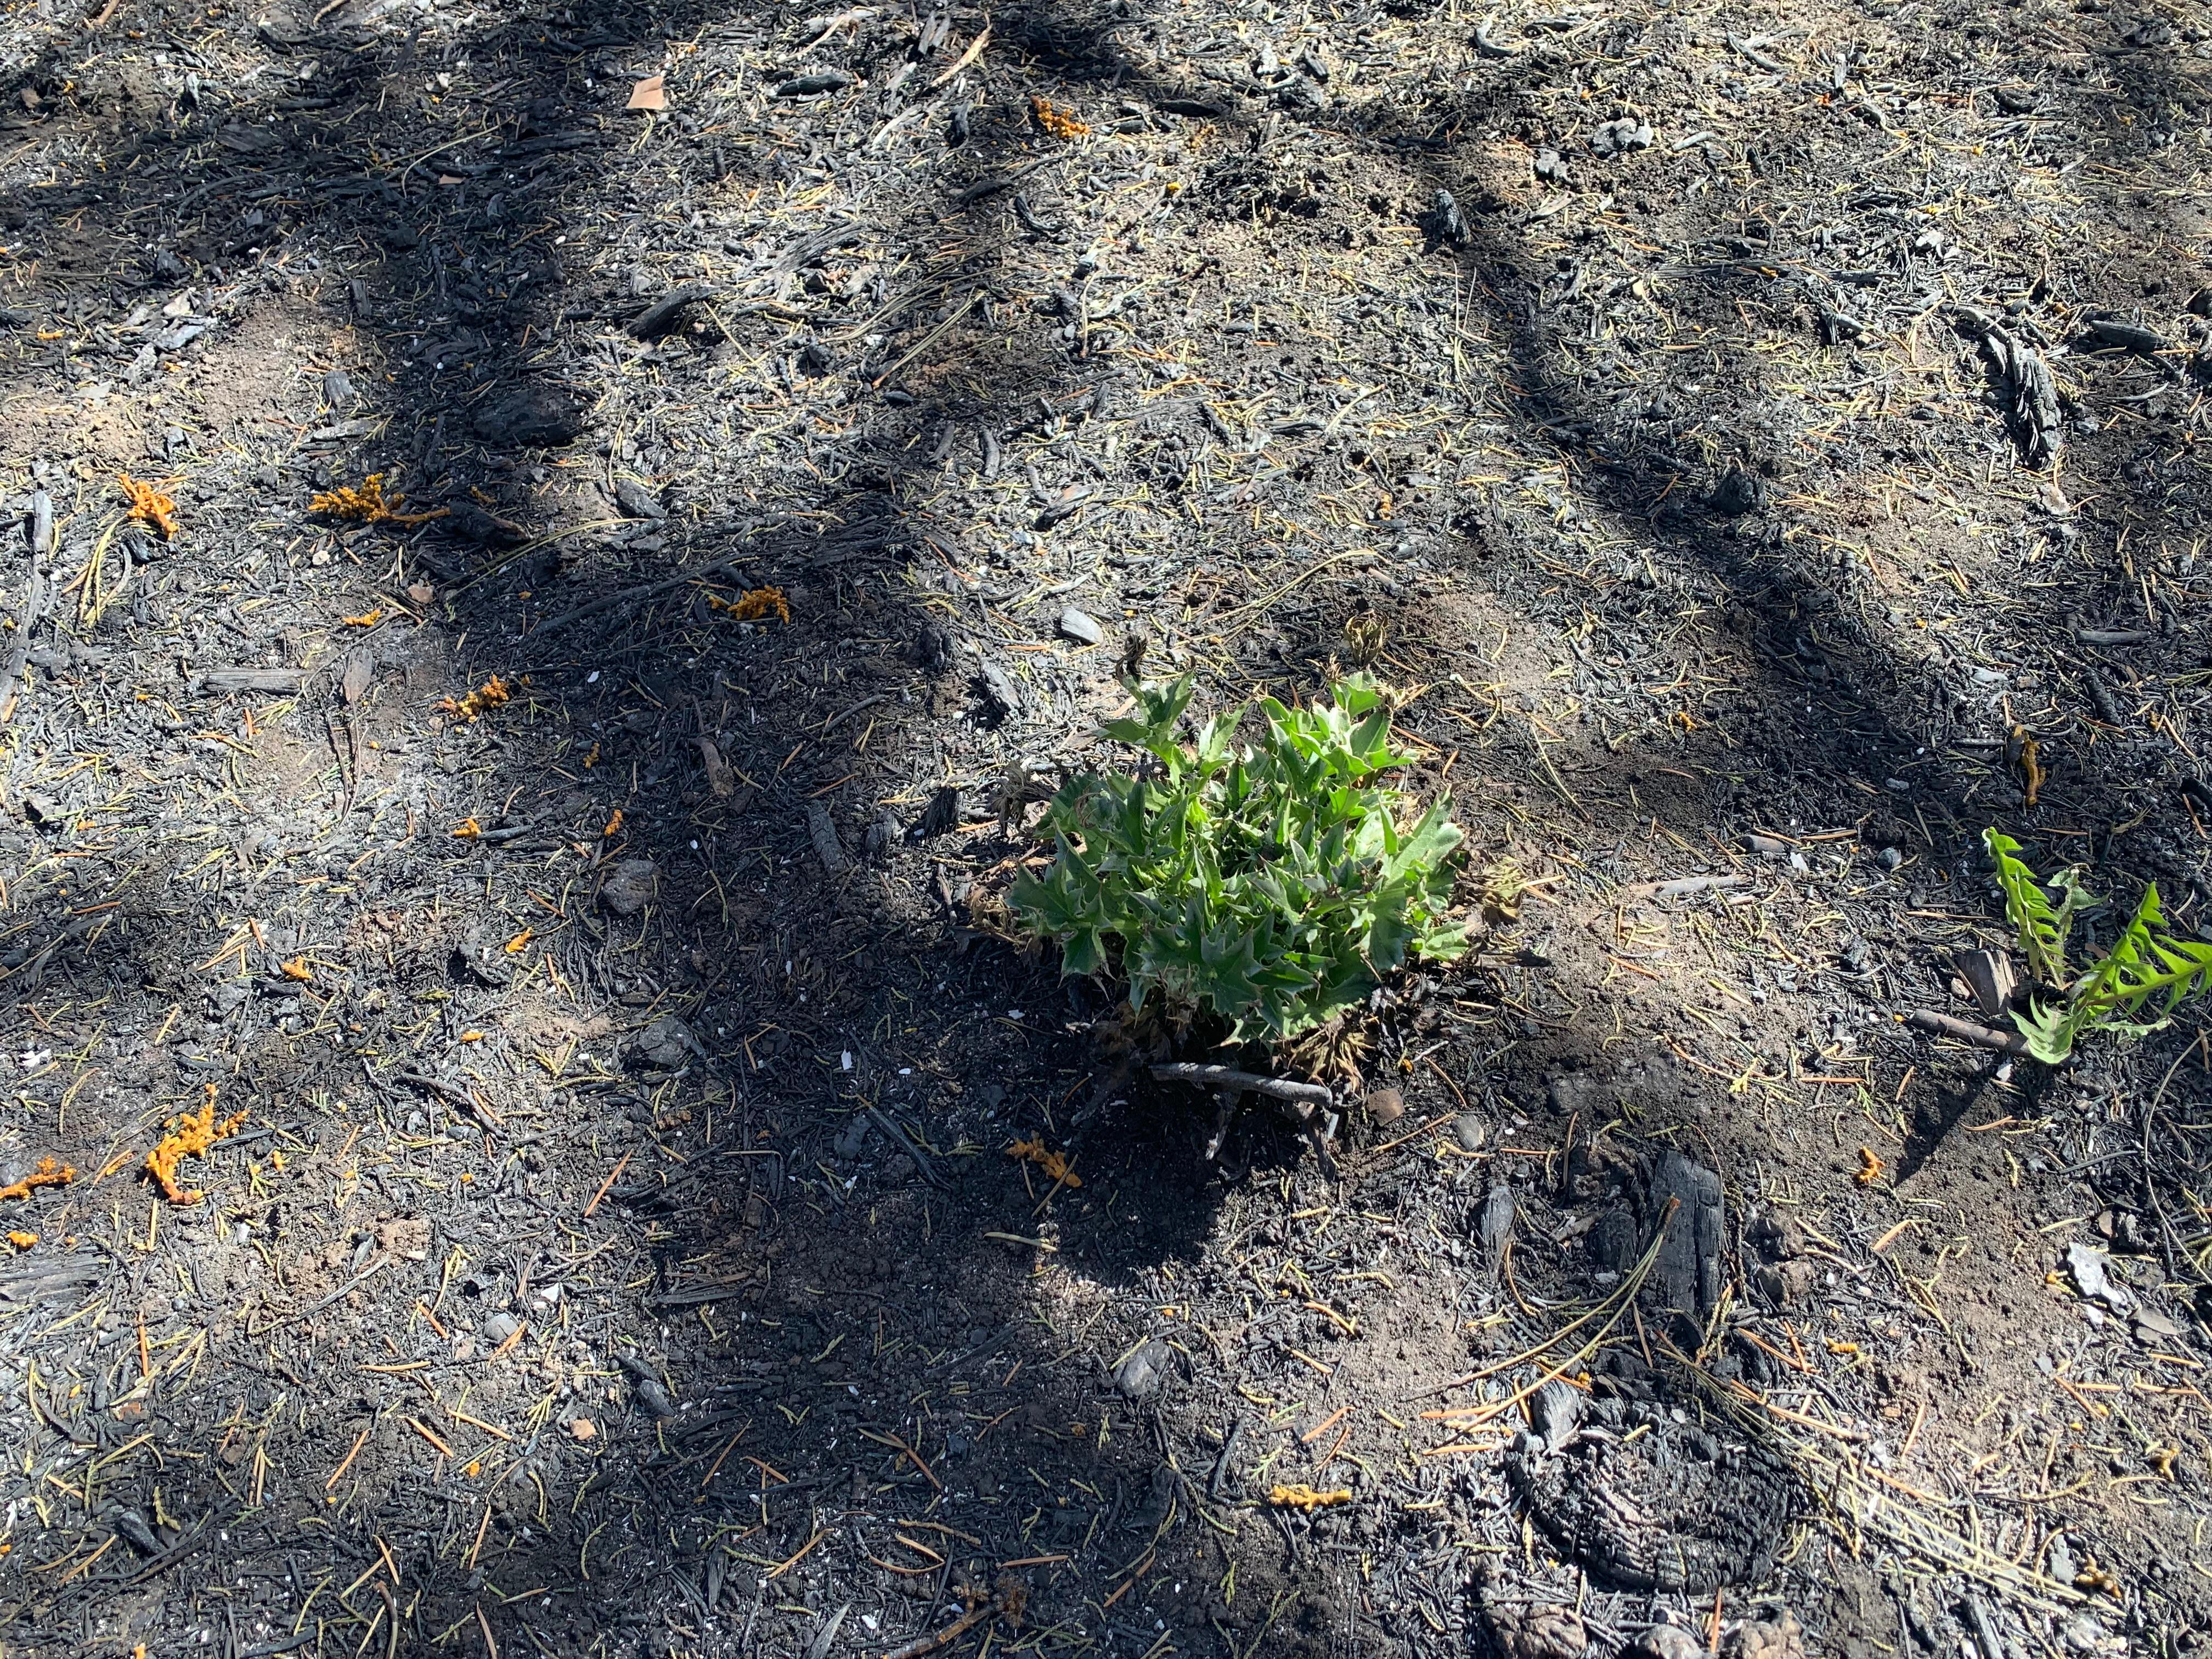 Photo shows new vegetation starting to sprout just days after the fire passed through the area.